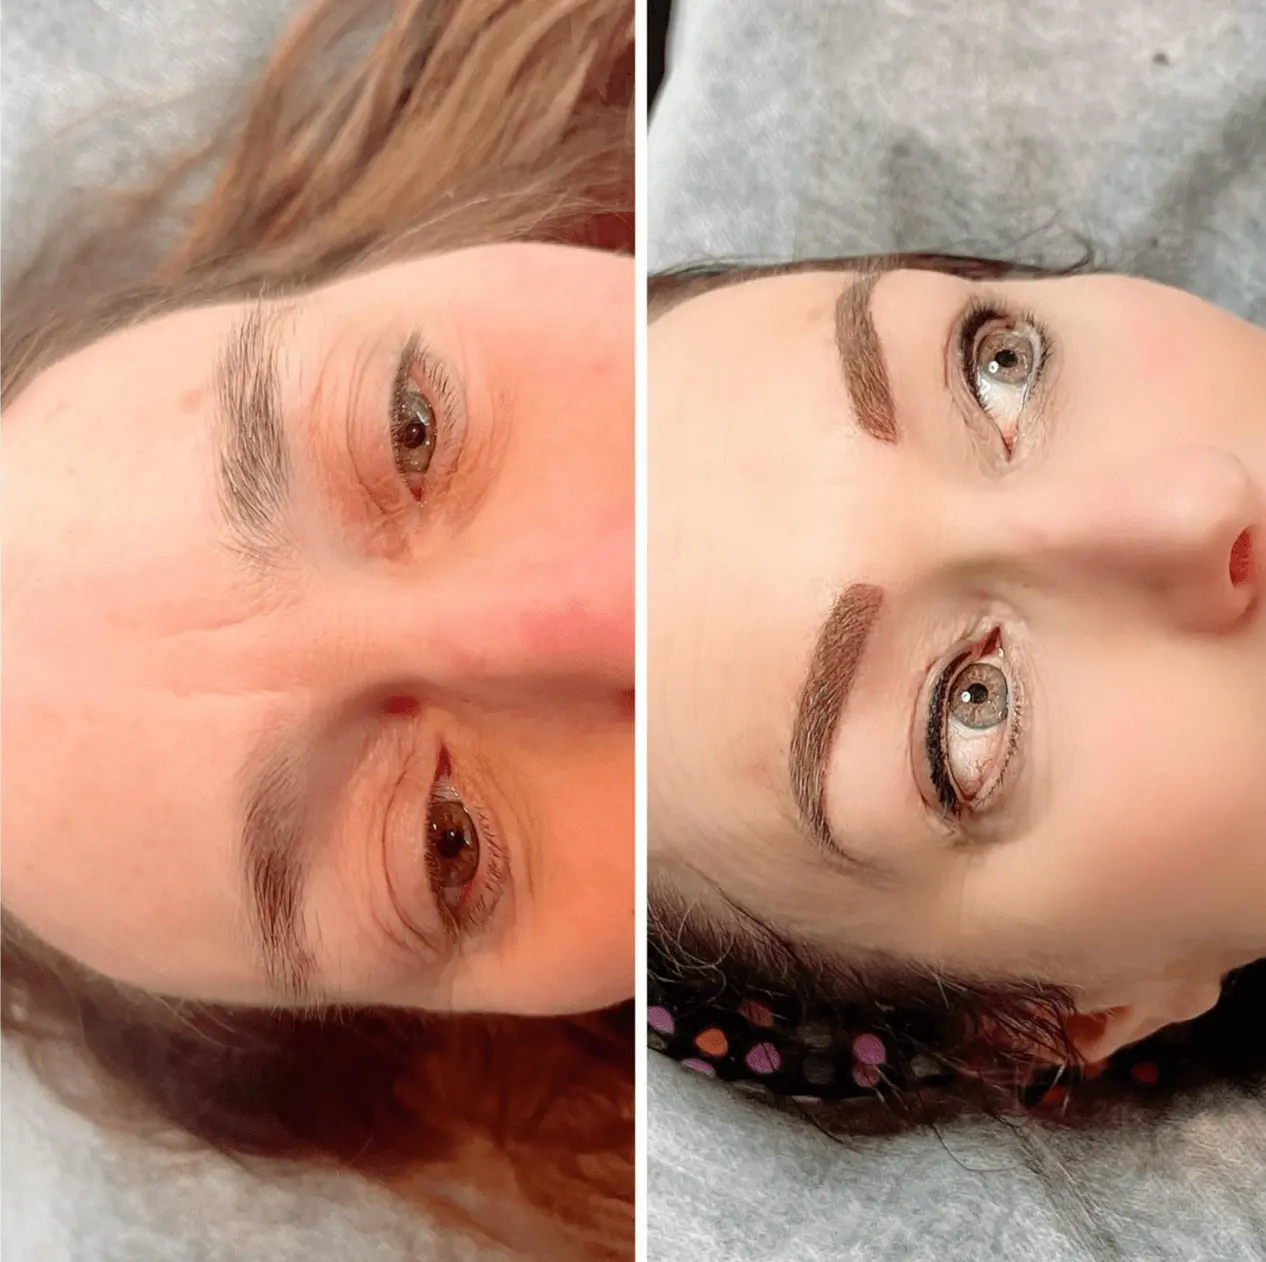 Saline Tattoo Removal Before And After